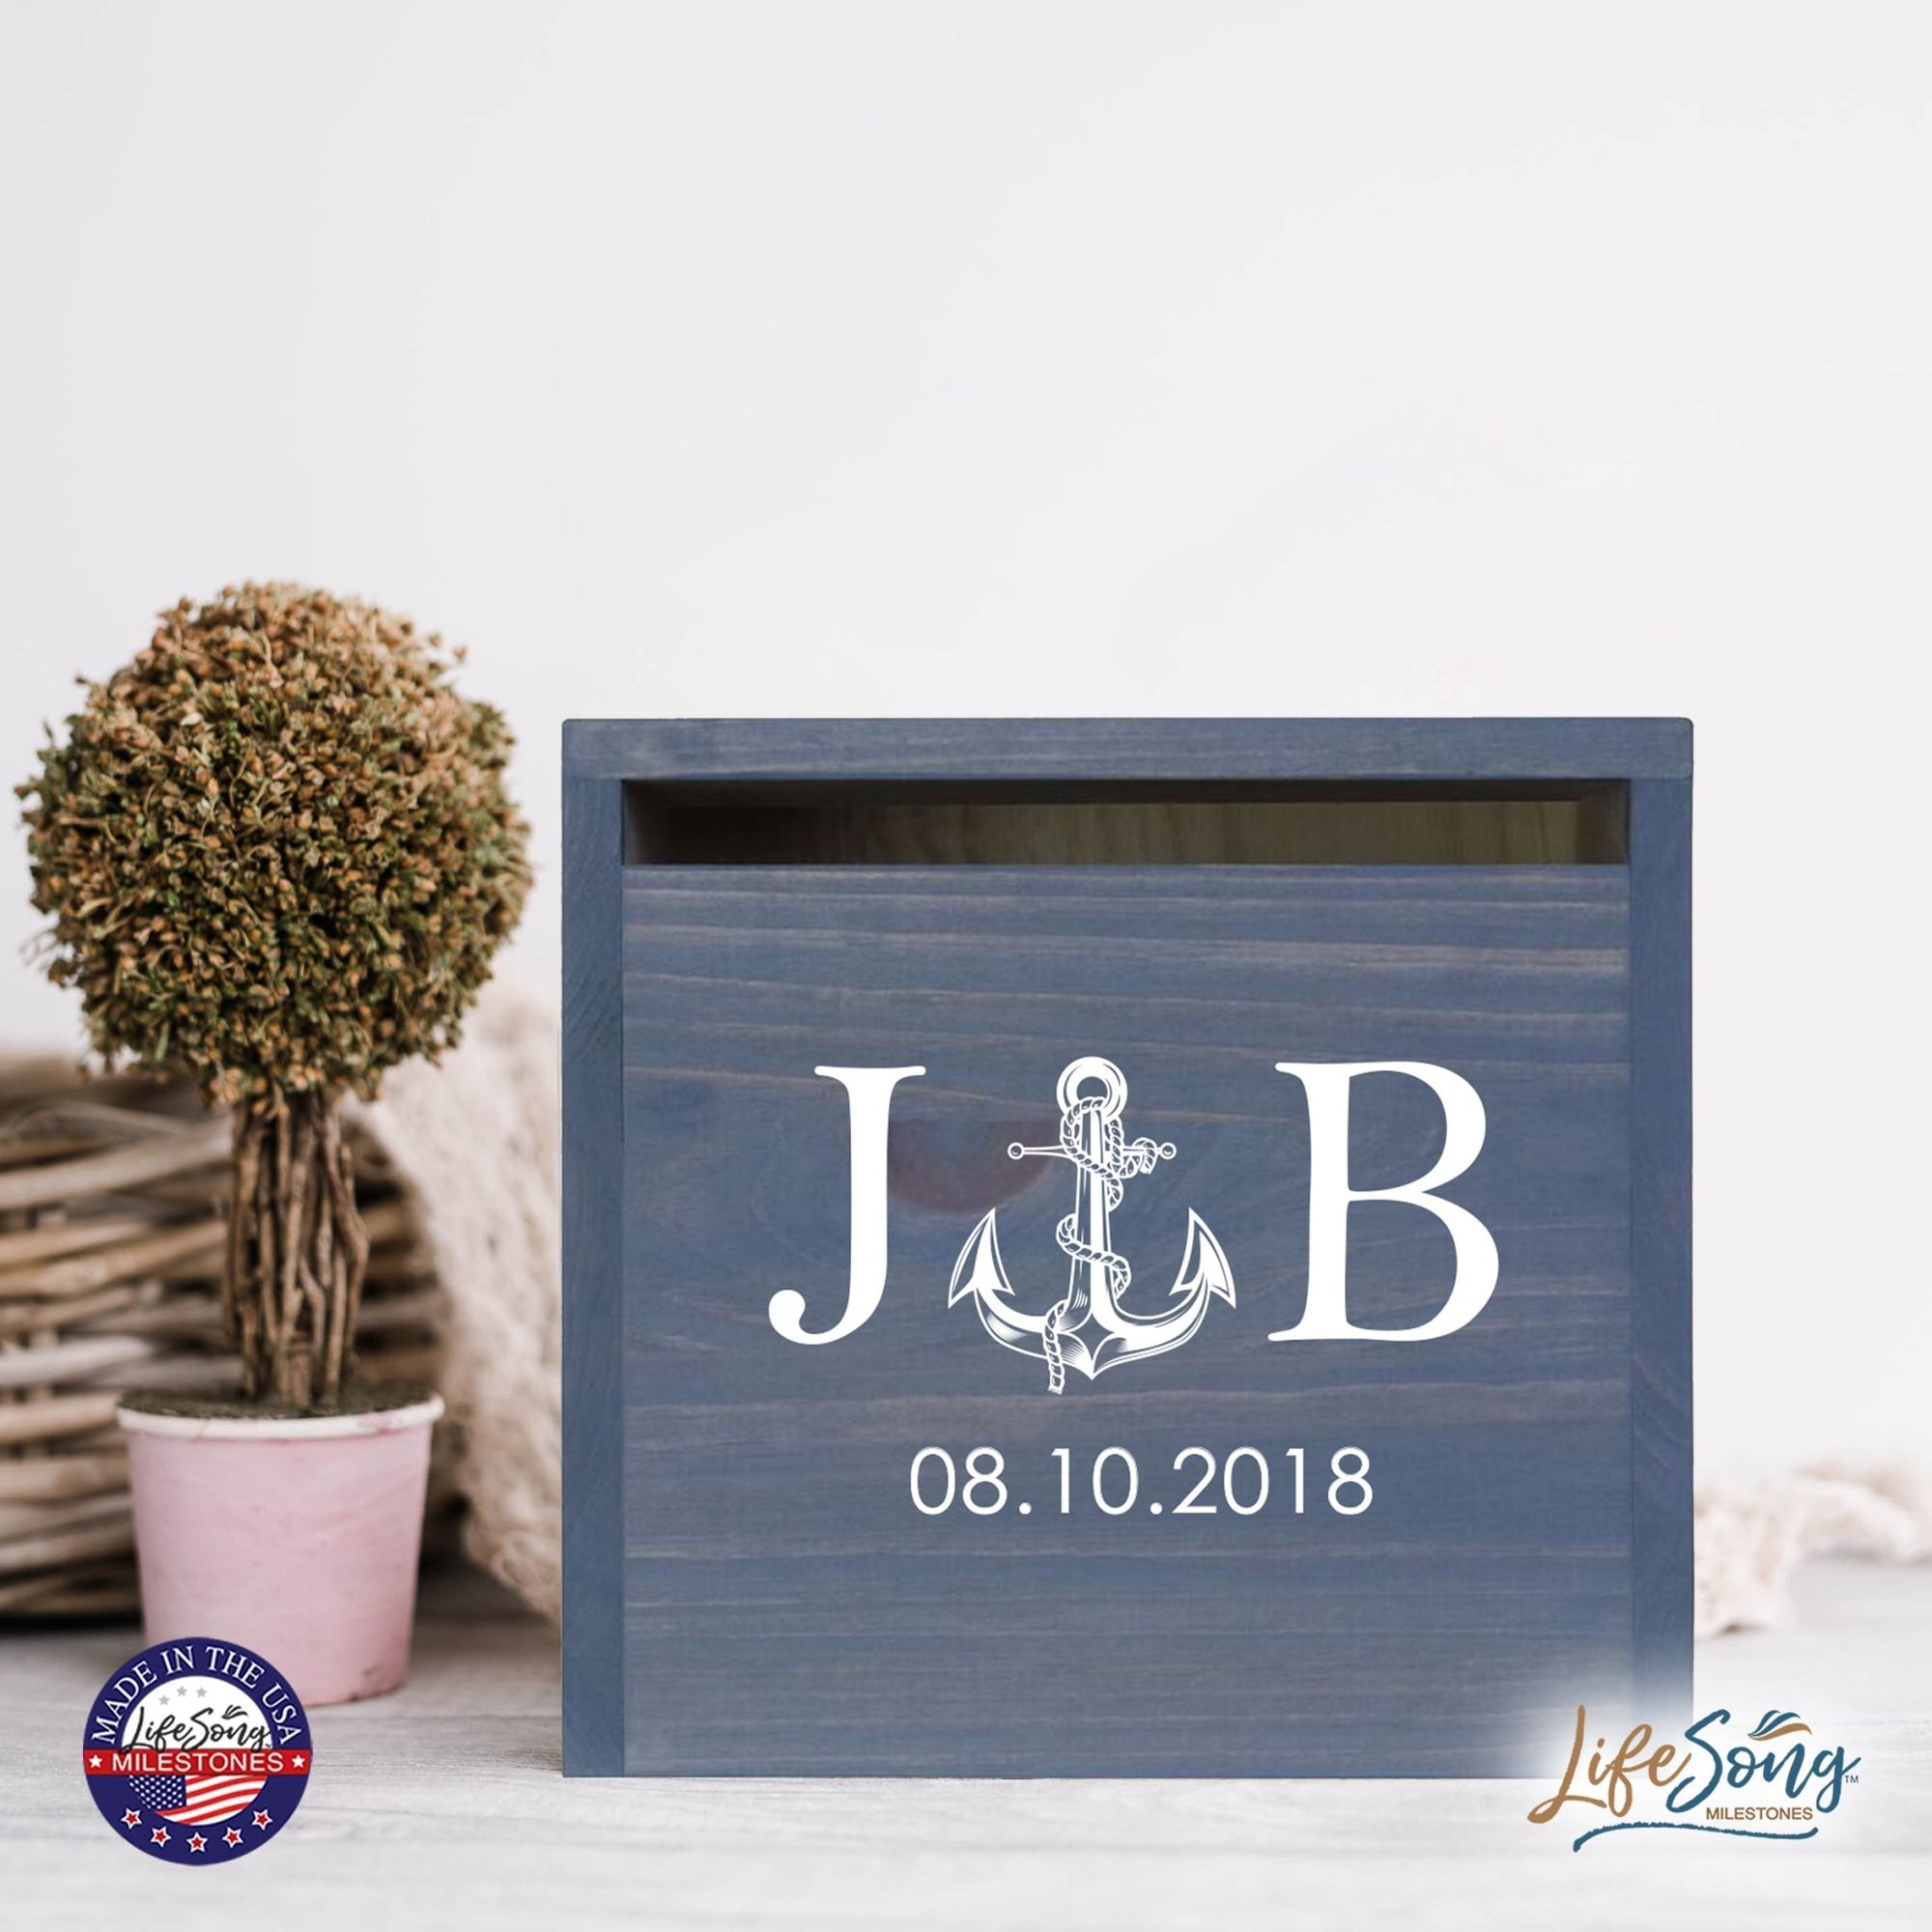 Personalized Wooden Card Box for Wedding Ceremonies, Venues, Receptions, Bridal Showers, and Engagement Parties 13.5x12 - J&B (Anchor) - LifeSong Milestones